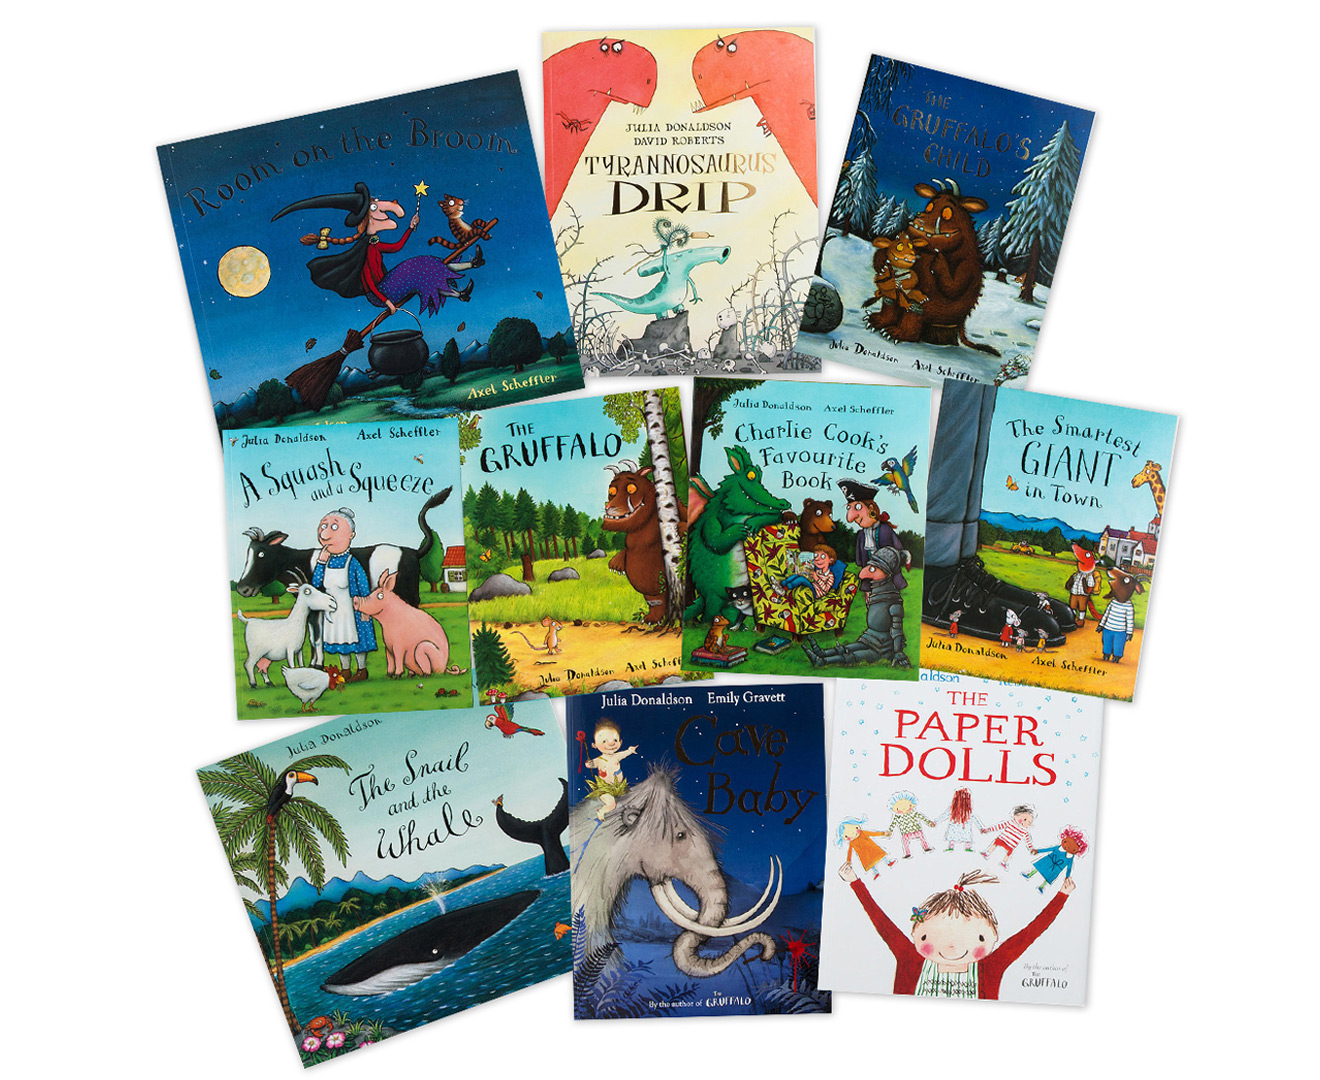 The Julia Donaldson Collection (10 titles)